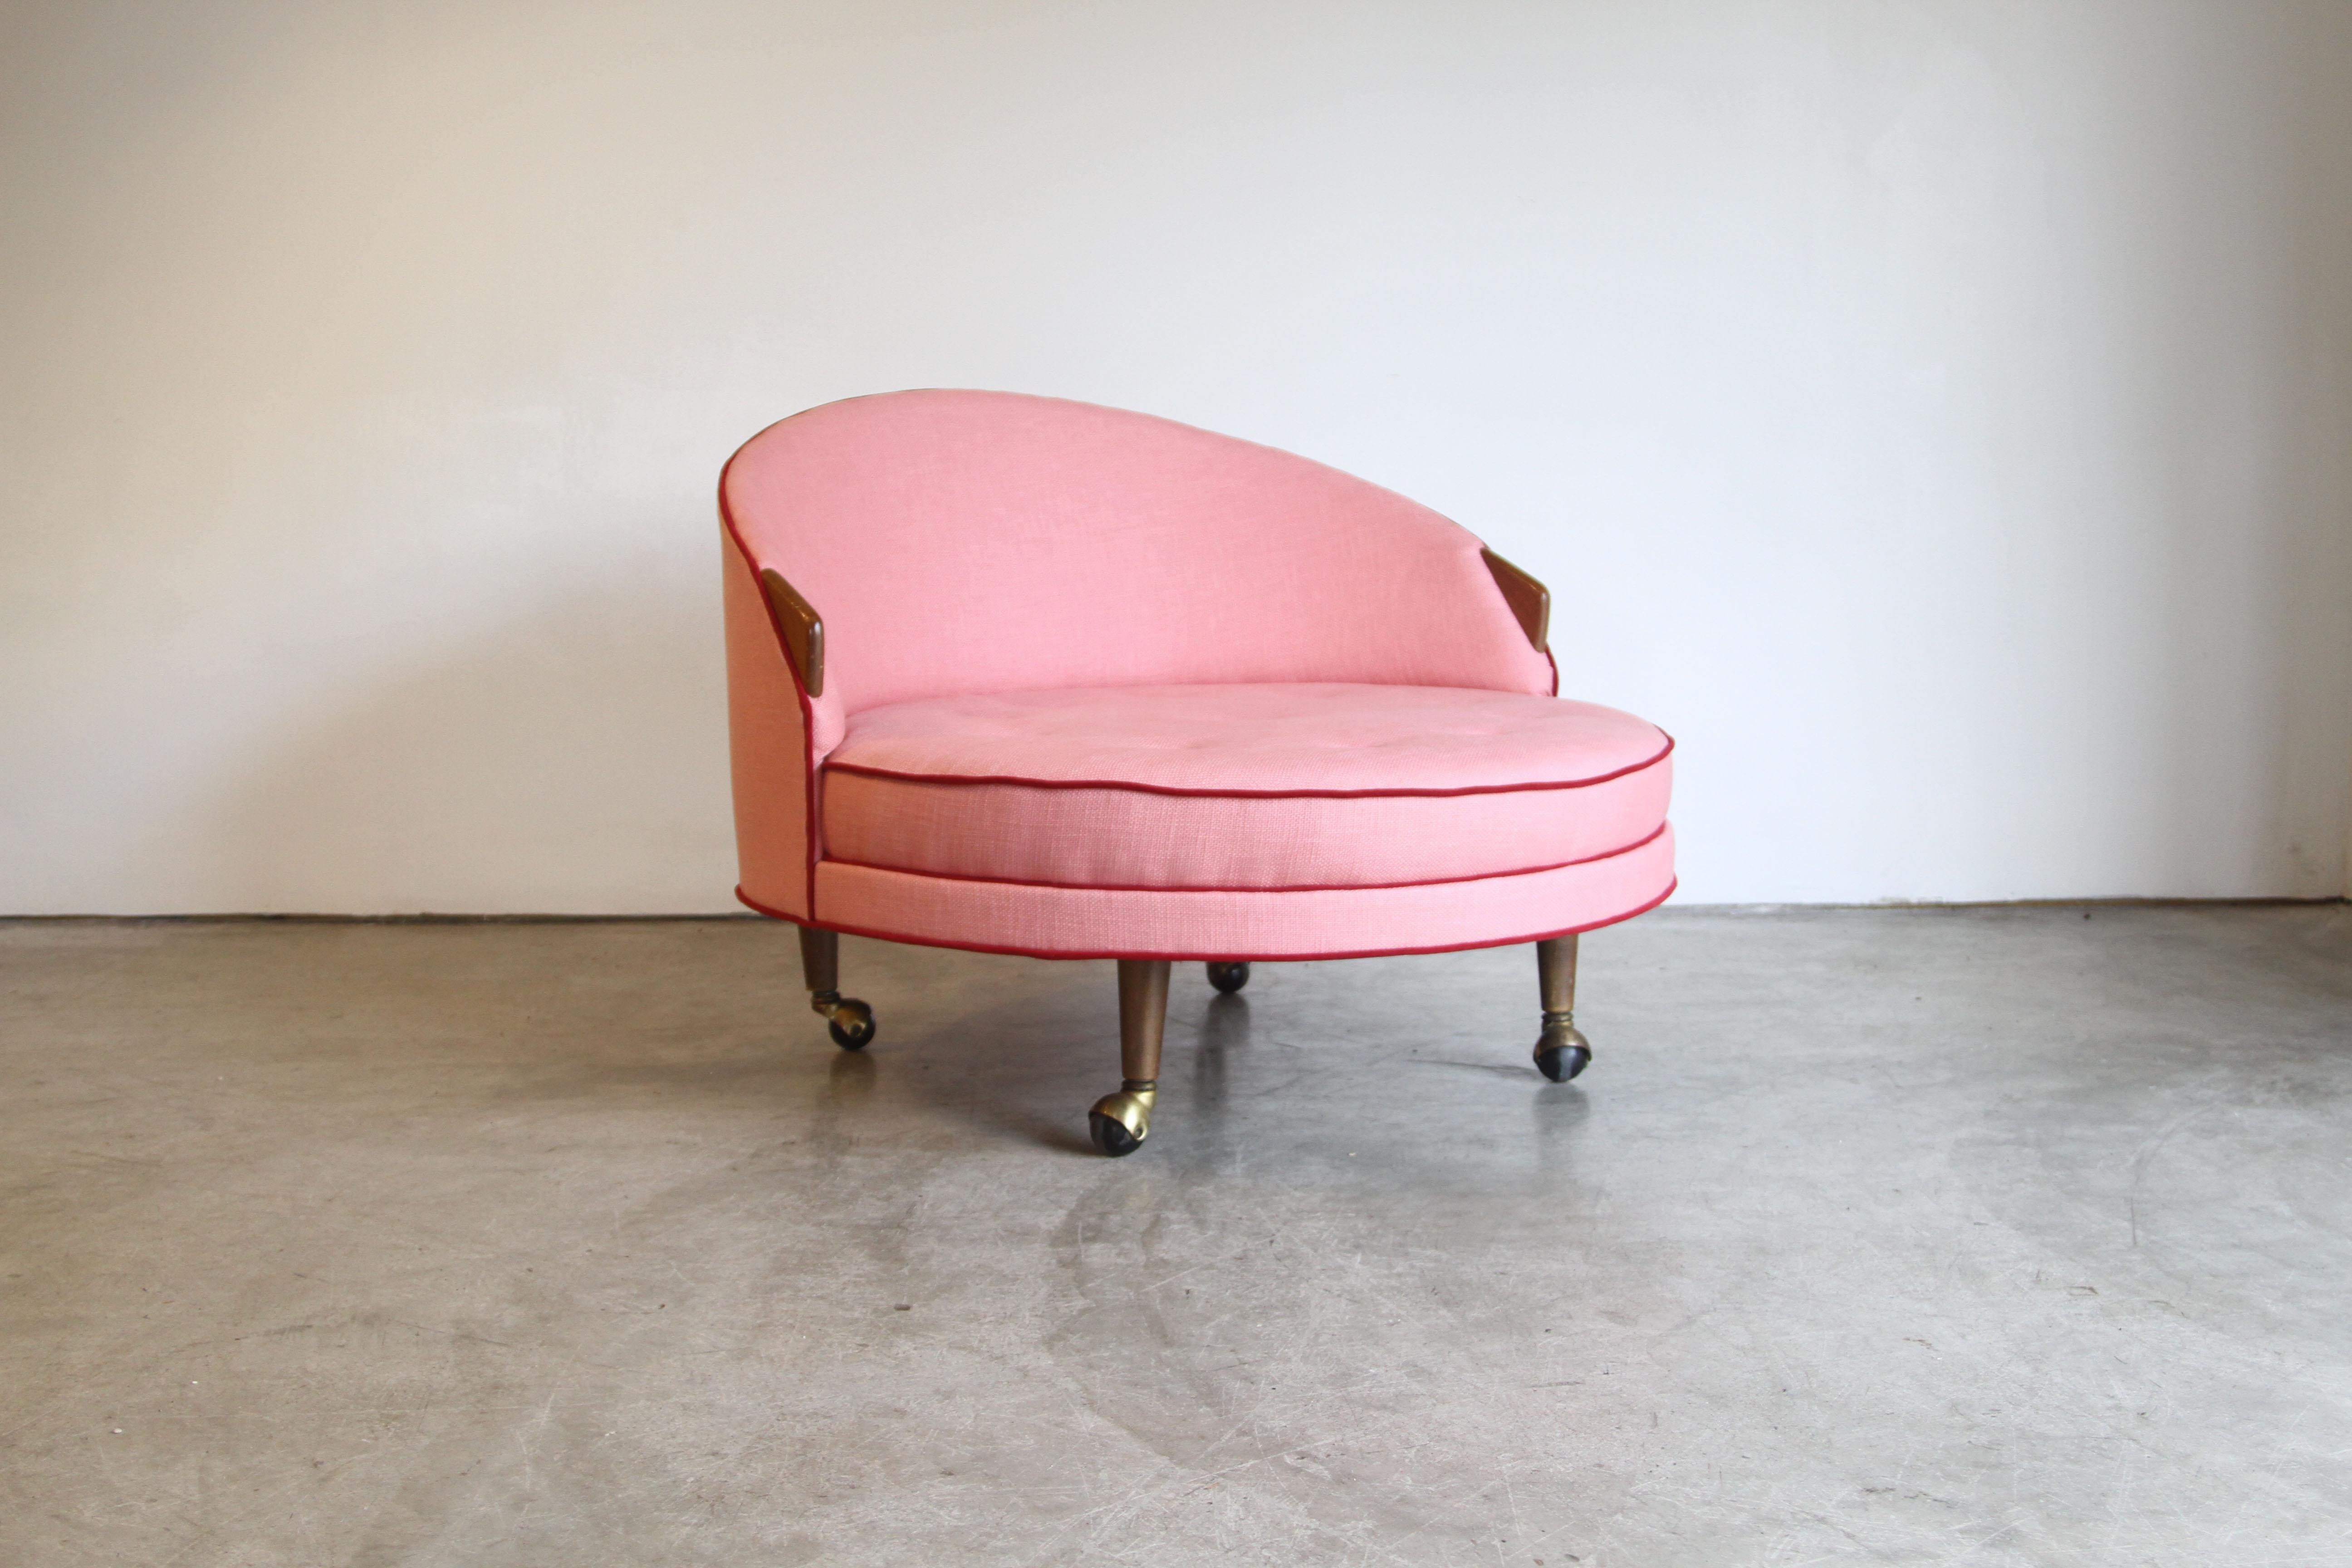 Designer: AdrainPearsall
Manufacture: Craft
Period/style: Mid-Century Modern
Country: USA
Date: 1950s.